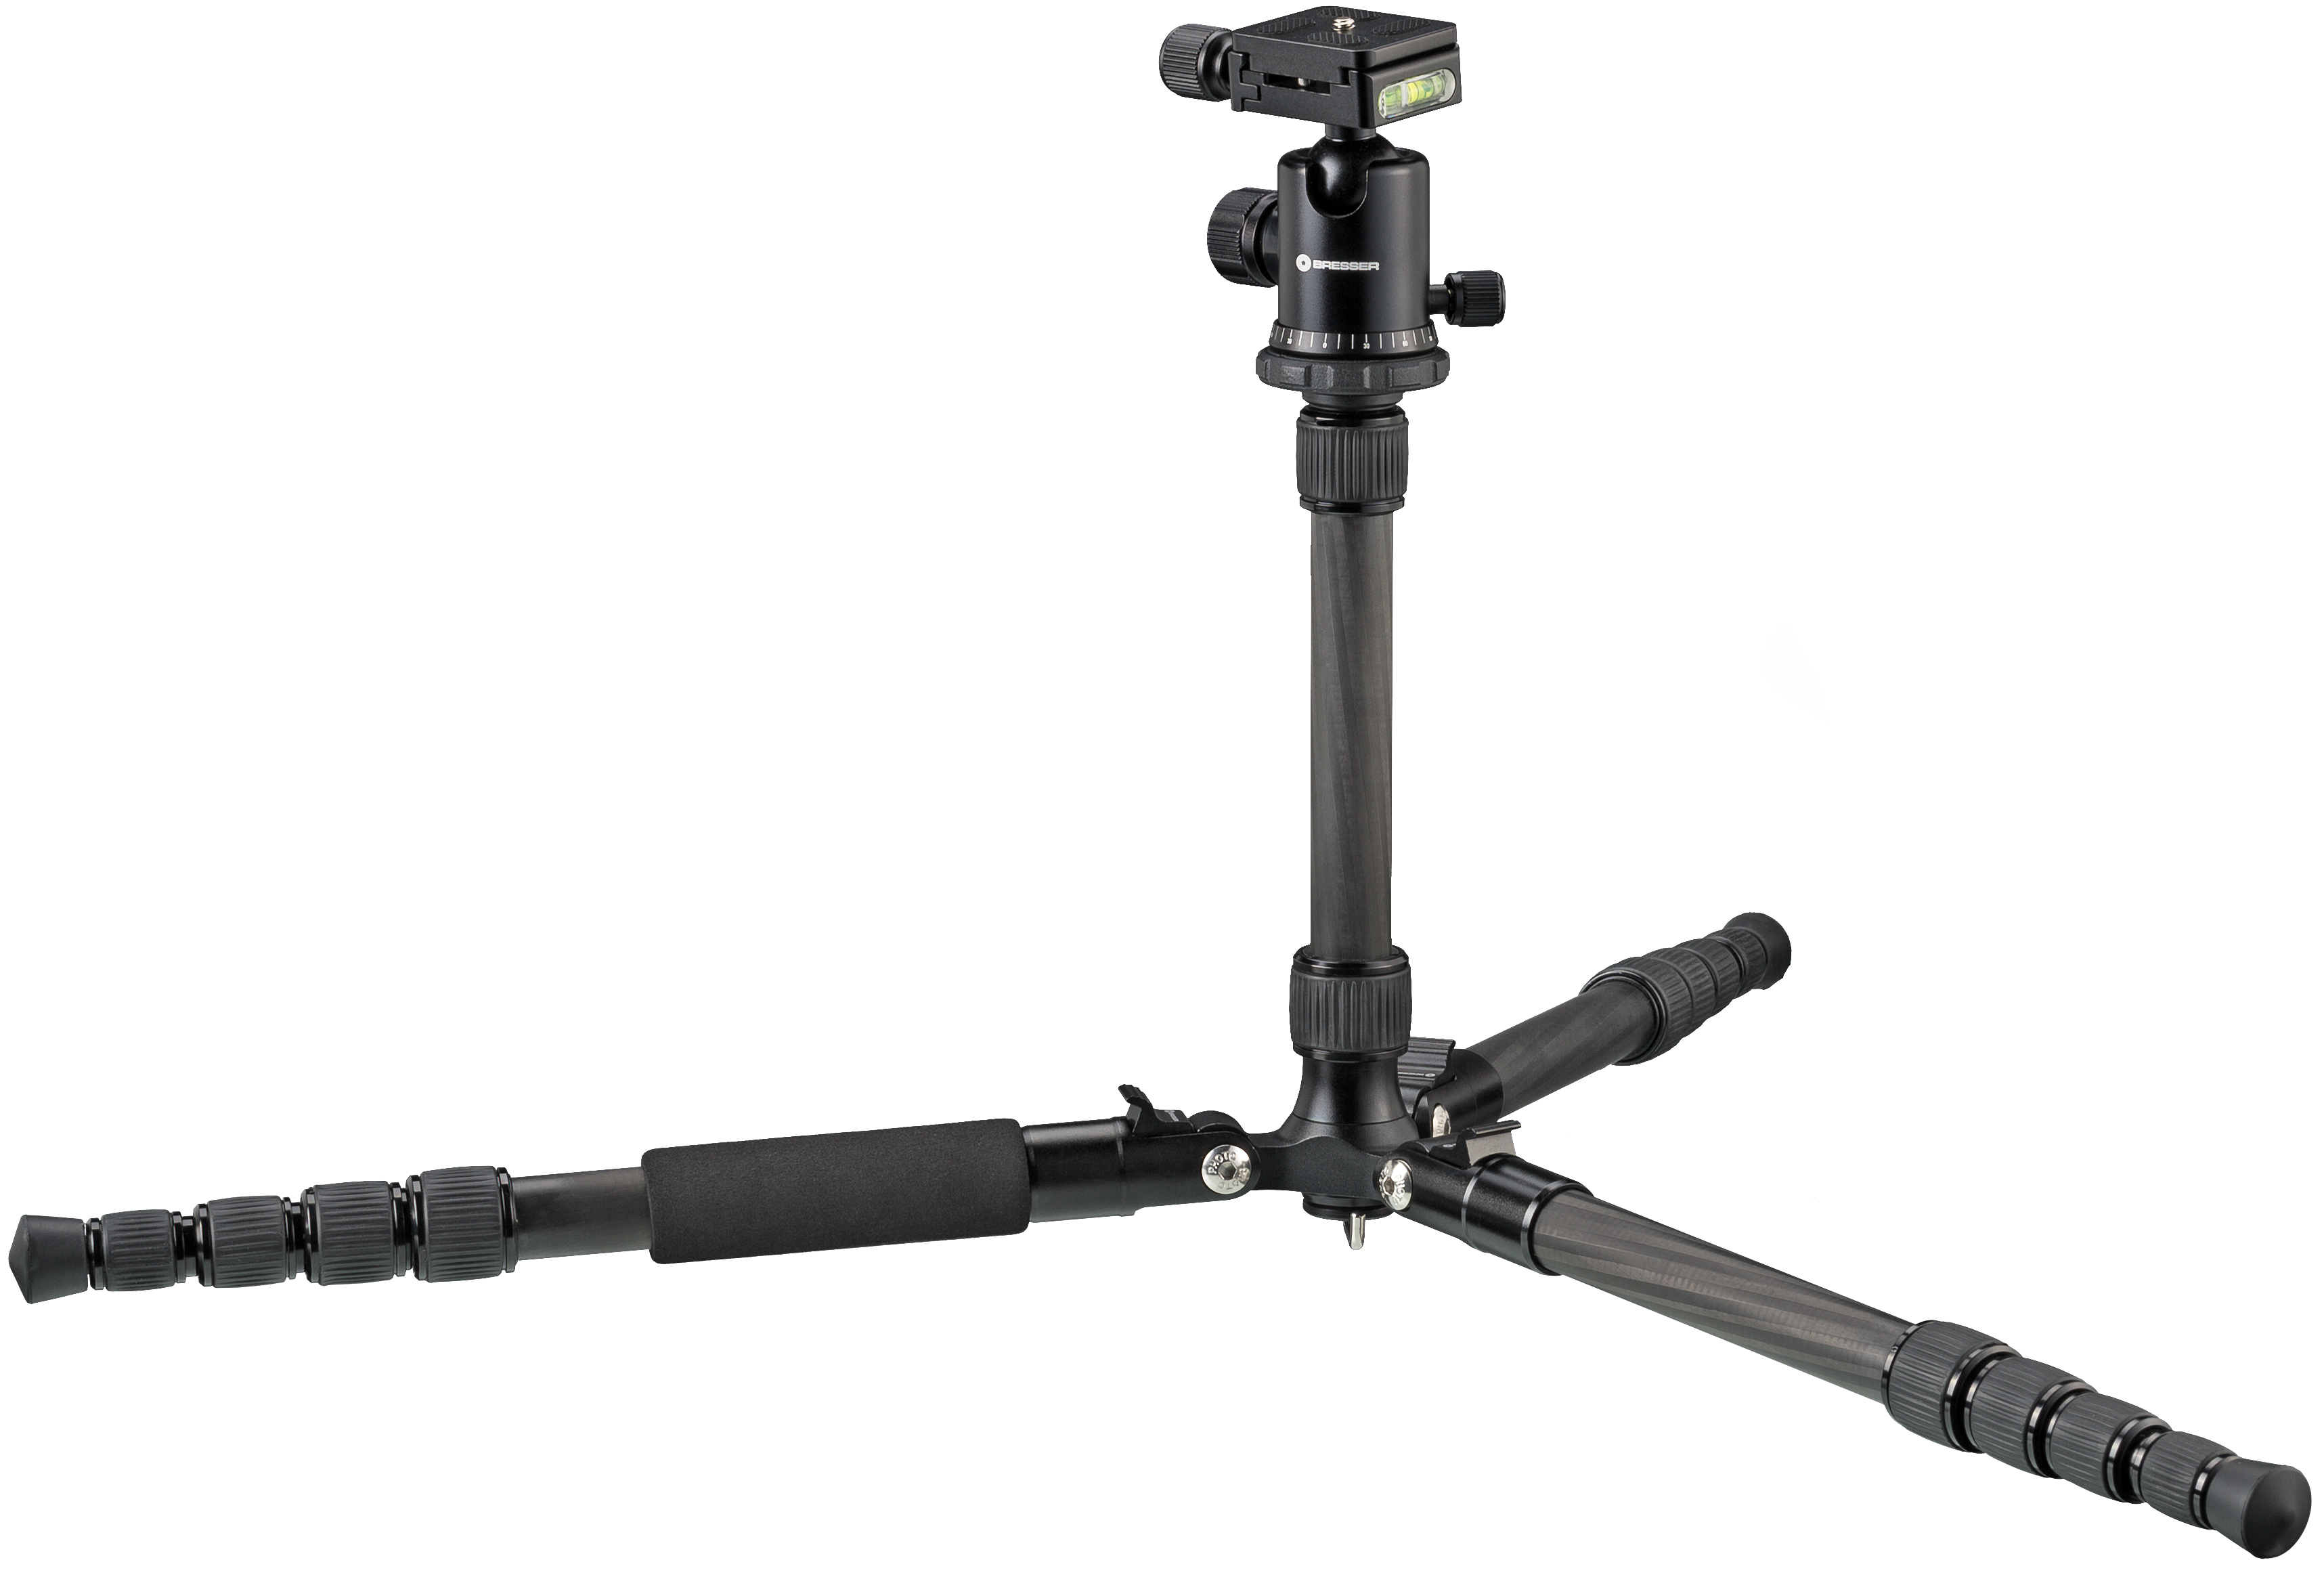 BRESSER BR-2205-N1 Carbon Photo Tripod up to 8 kg also usable as Ground Level Tripod